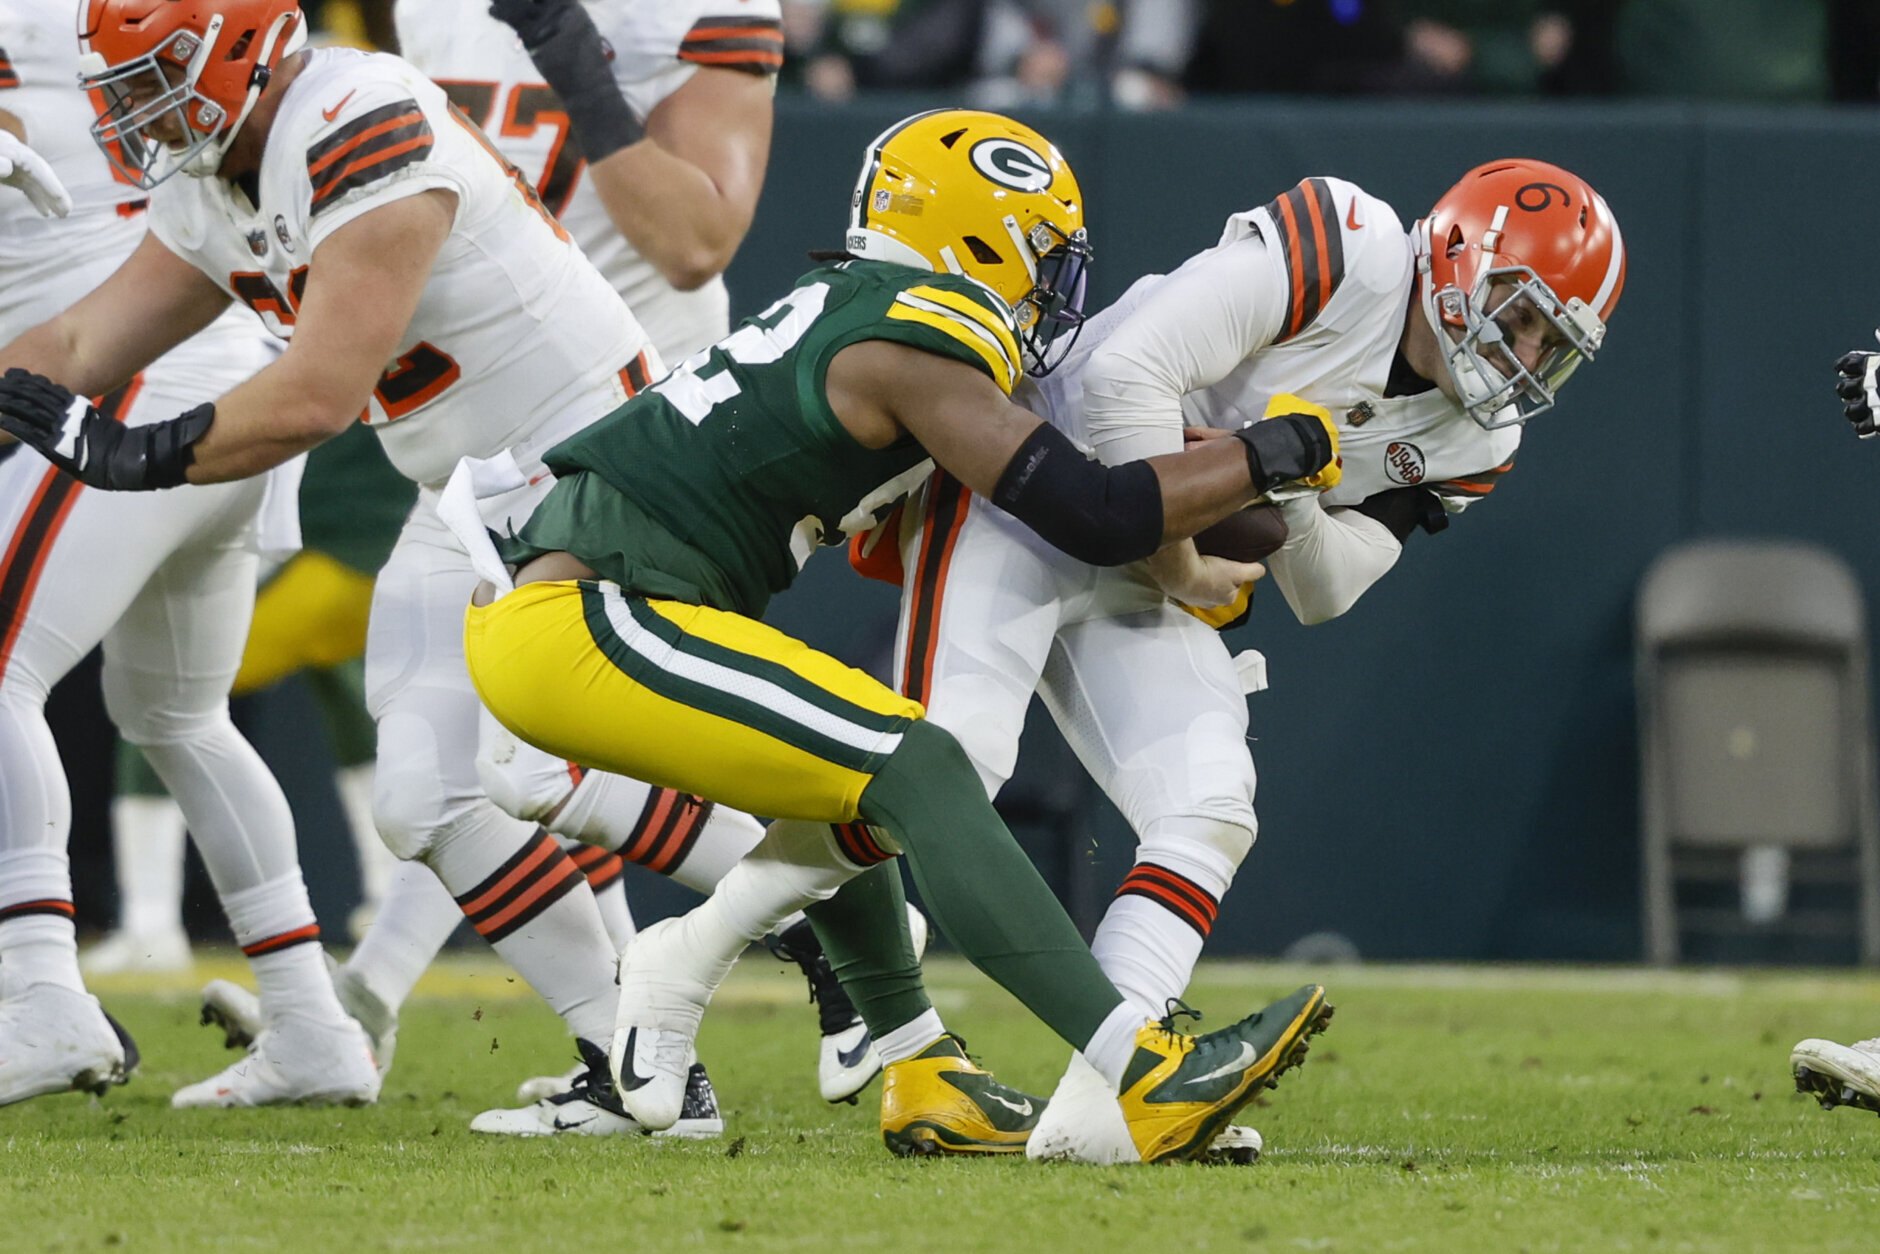 <p><em><strong>Browns 22</strong></em><br />
<em><strong>Packers 24</strong></em></p>
<p>Aaron Rodgers gets enough flowers so I don&#8217;t really need to touch on him breaking Brett Favre&#8217;s touchdown record (which was only a matter of time). For me, this game gave <a href="https://www.espn.com/nfl/story/_/id/32937635/baker-mayfield-admits-hurt-team-tossing-four-picks-cleveland-browns-two-point-loss" target="_blank" rel="noopener">Cleveland its answer on Baker Mayfield</a>. Do NOT cut this man a big check. But <a href="https://profootballtalk.nbcsports.com/2021/12/24/will-browns-make-a-play-for-deshaun-watson/" target="_blank" rel="noopener">a deal for Deshaun Watson</a>? That rumor might get legs now.</p>
